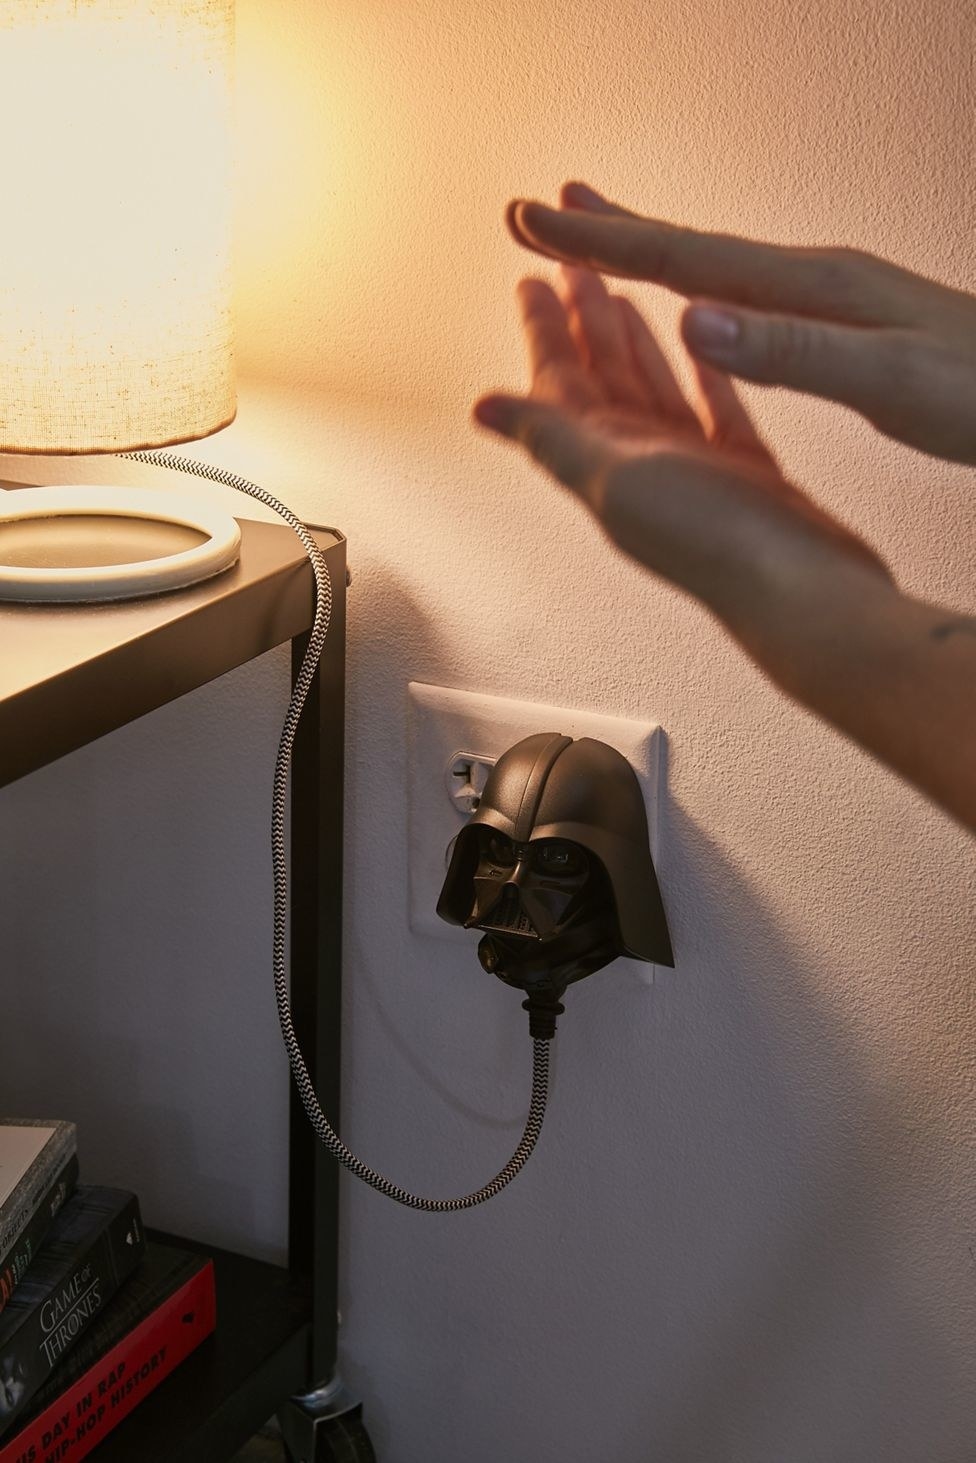 A person clapping their hands to control a voice-activated wall plug shaped like Darth Vader&#x27;s head